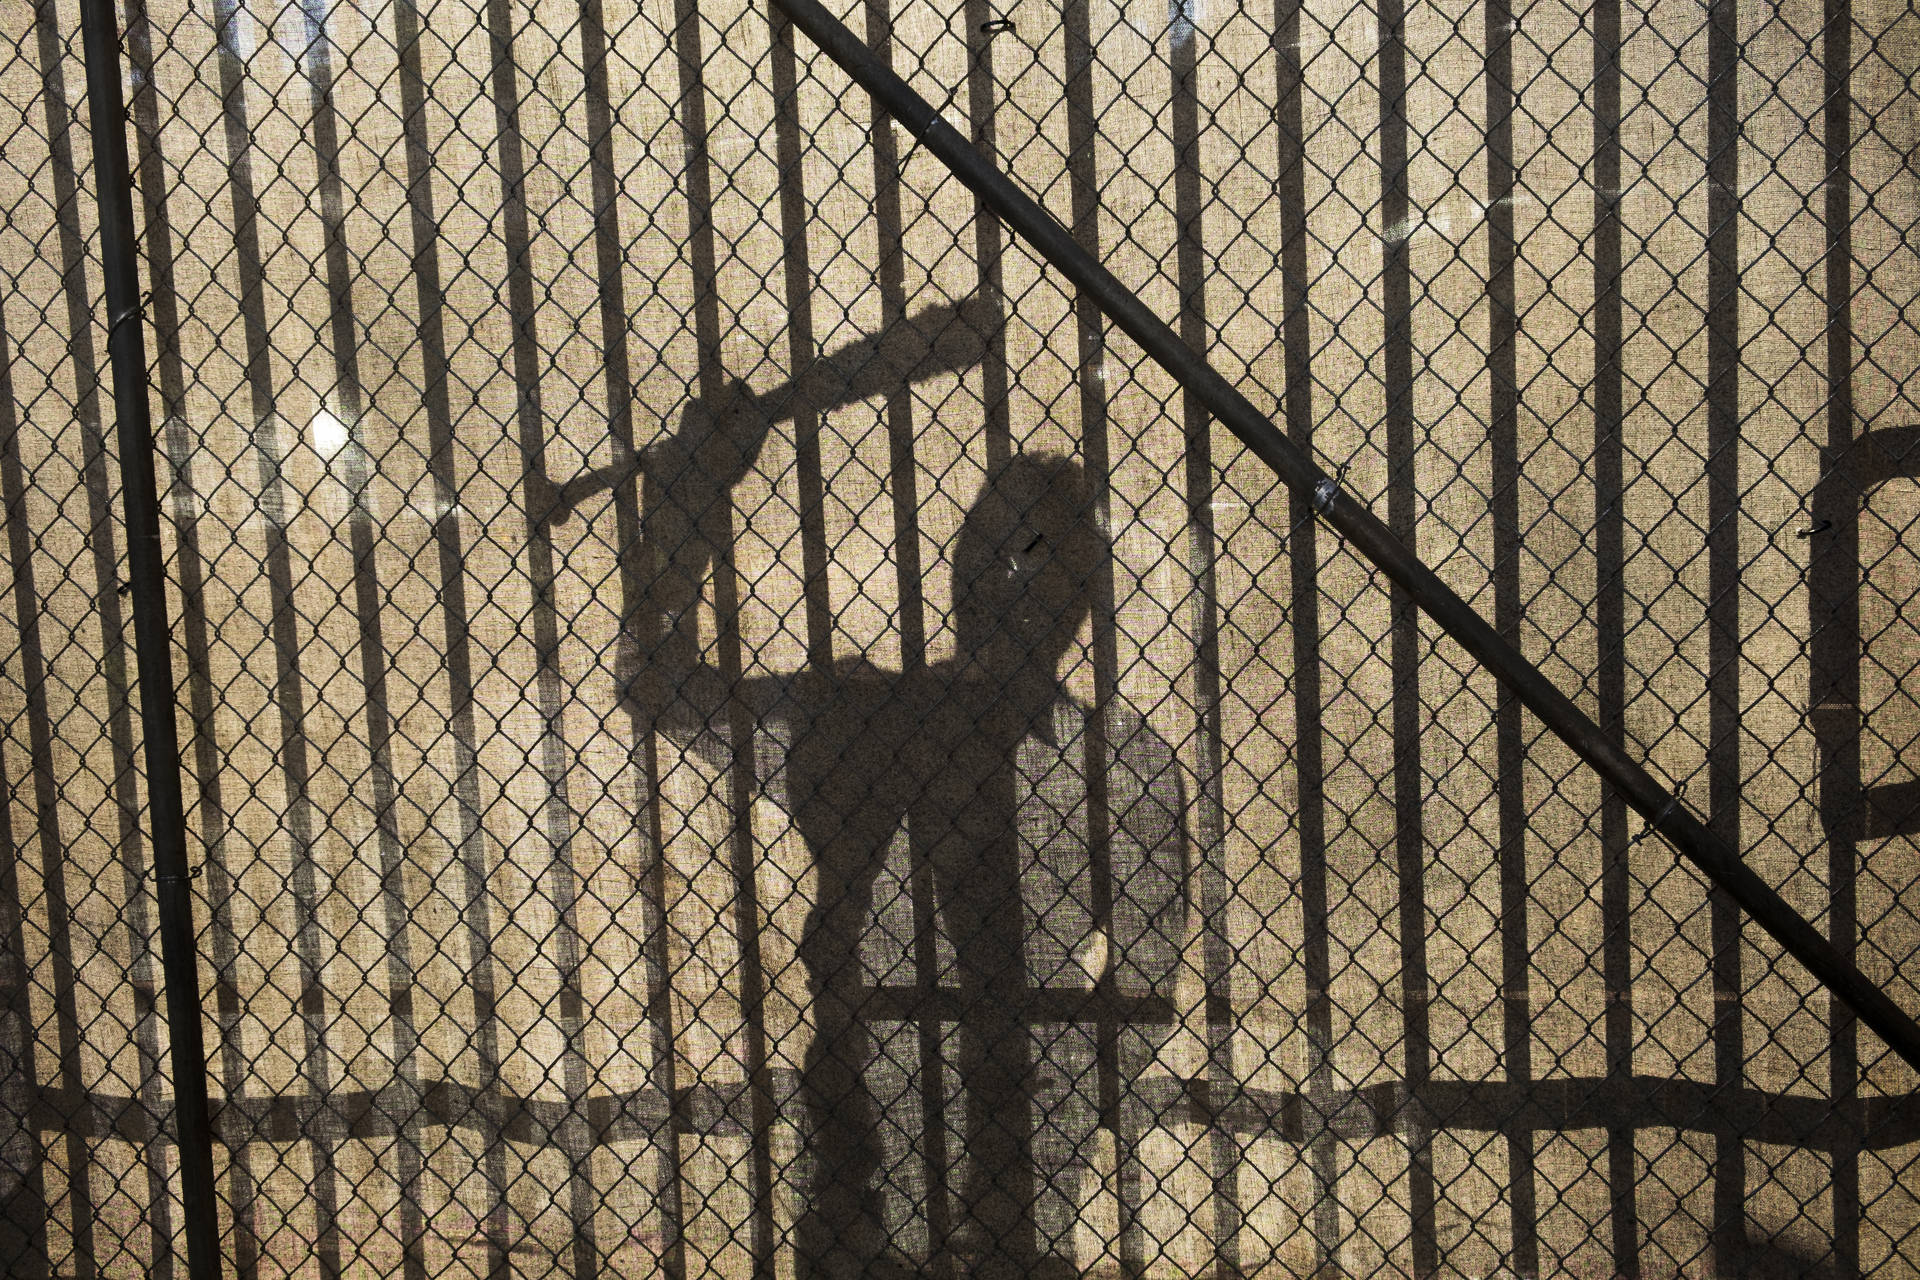 Negan's Shadow Against A Fence Background